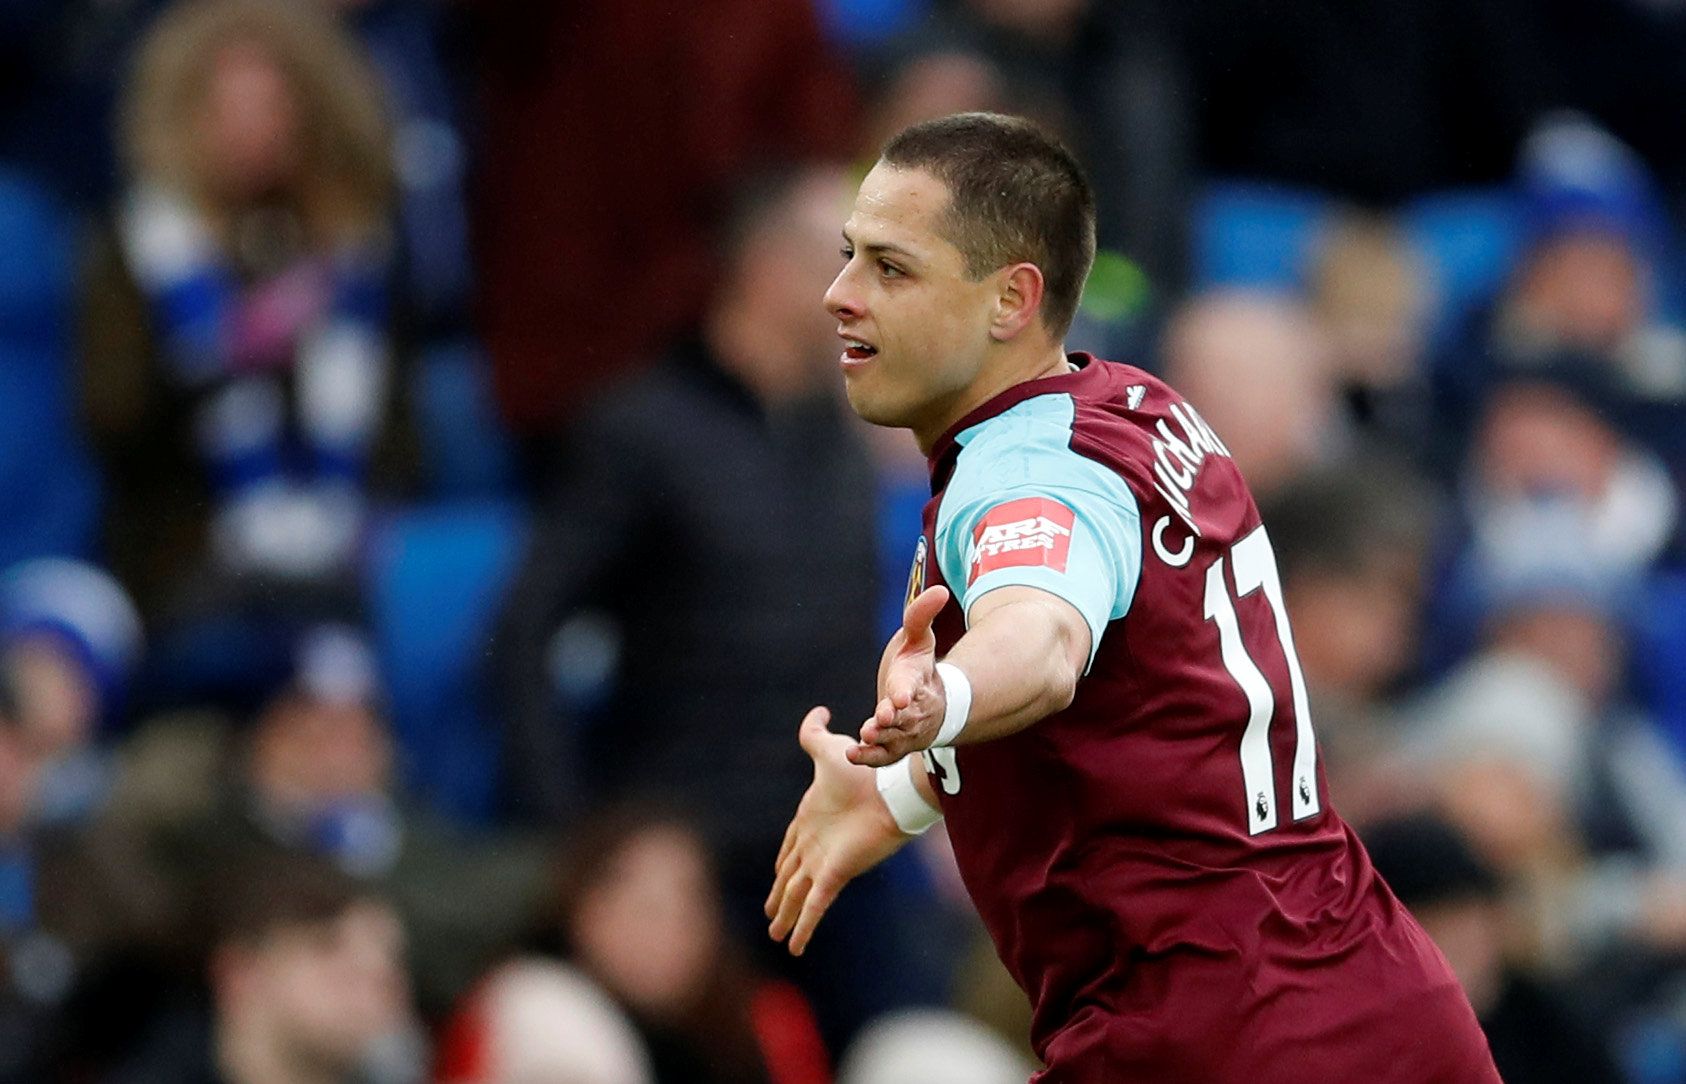 Soccer Football - Premier League - Brighton &amp; Hove Albion vs West Ham United - The American Express Community Stadium, Brighton, Britain - February 3, 2018   West Ham United's Javier Hernandez celebrates scoring their first goal     Action Images via Reuters/Matthew Childs    EDITORIAL USE ONLY. No use with unauthorized audio, video, data, fixture lists, club/league logos or "live" services. Online in-match use limited to 75 images, no video emulation. No use in betting, games or single club